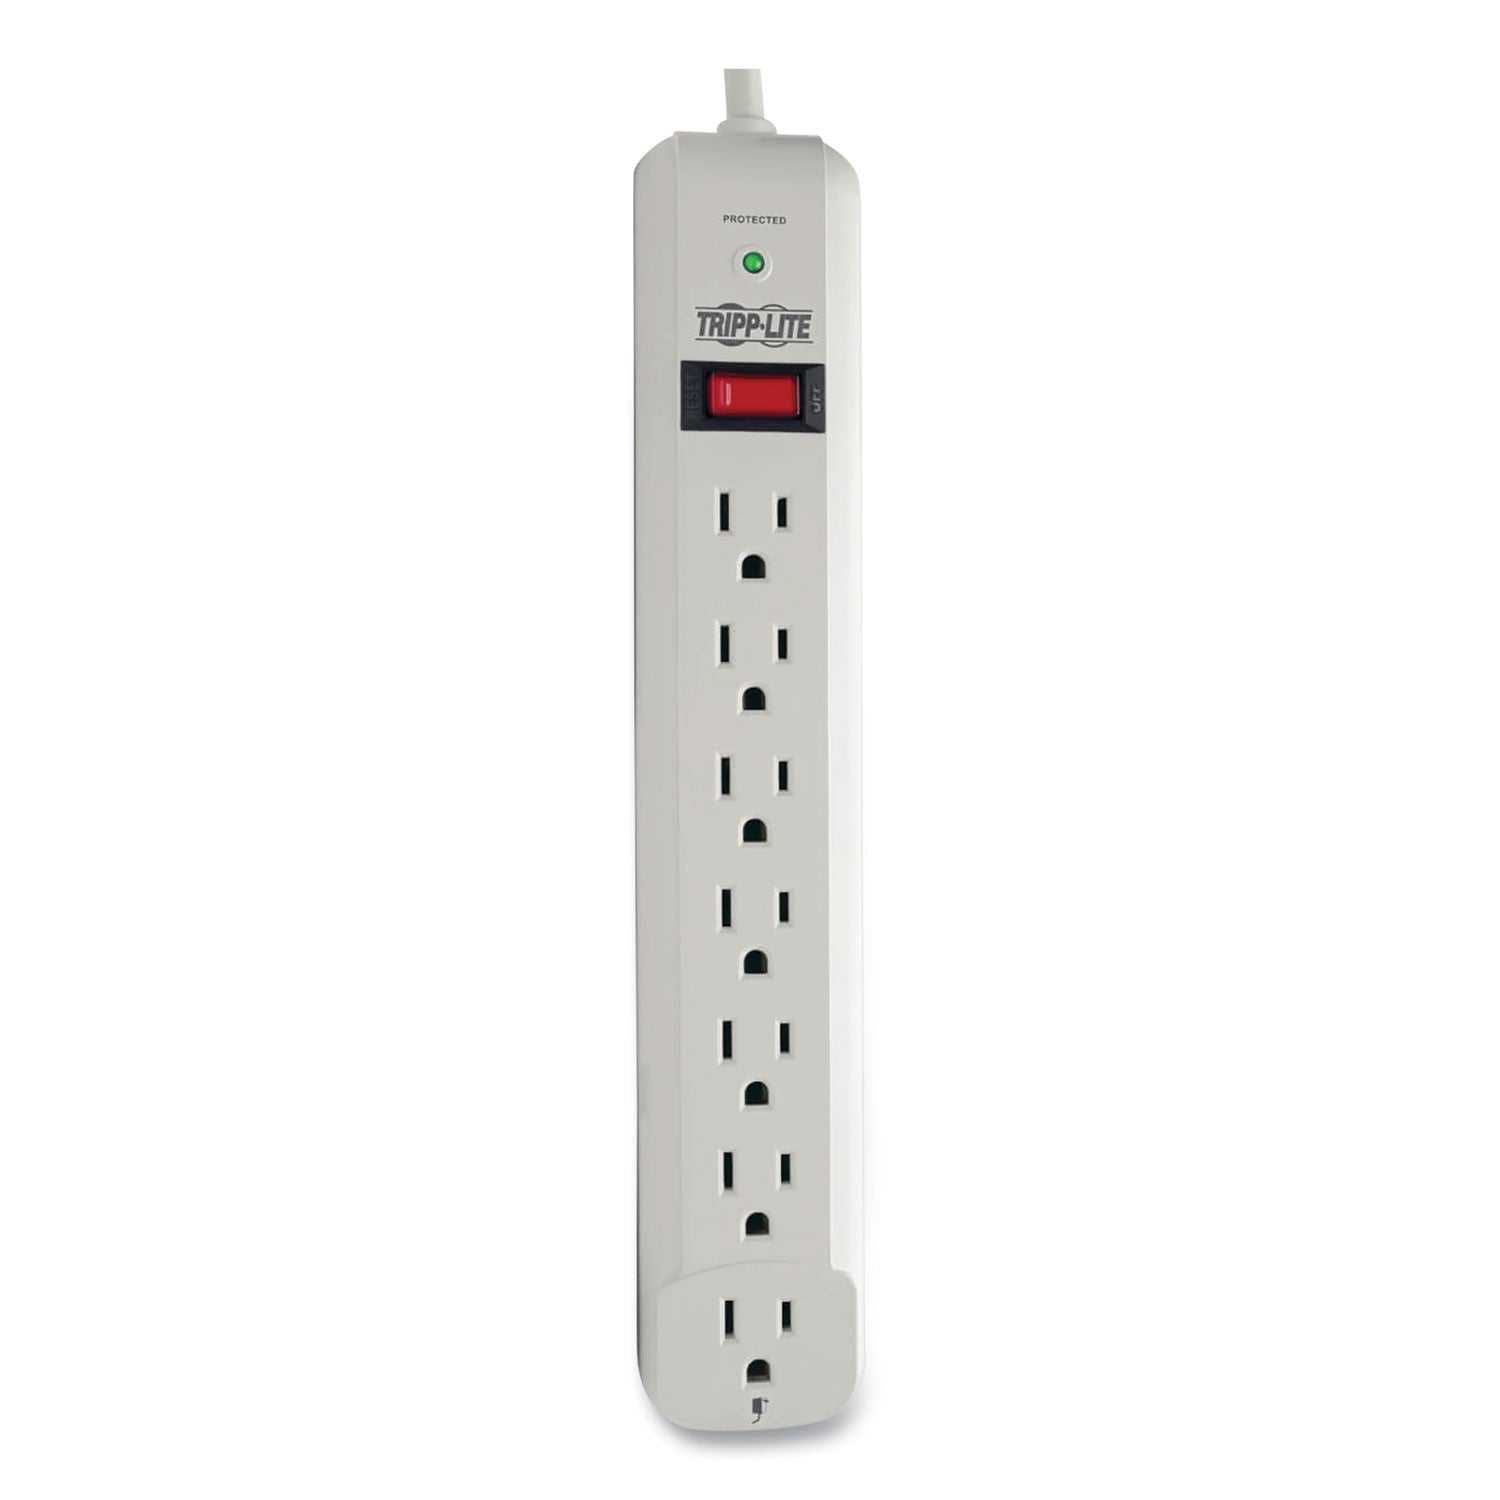 Protect It! Surge Protector, 7 AC Outlets, 6 ft Cord, 1,080 J, Light Gray - 